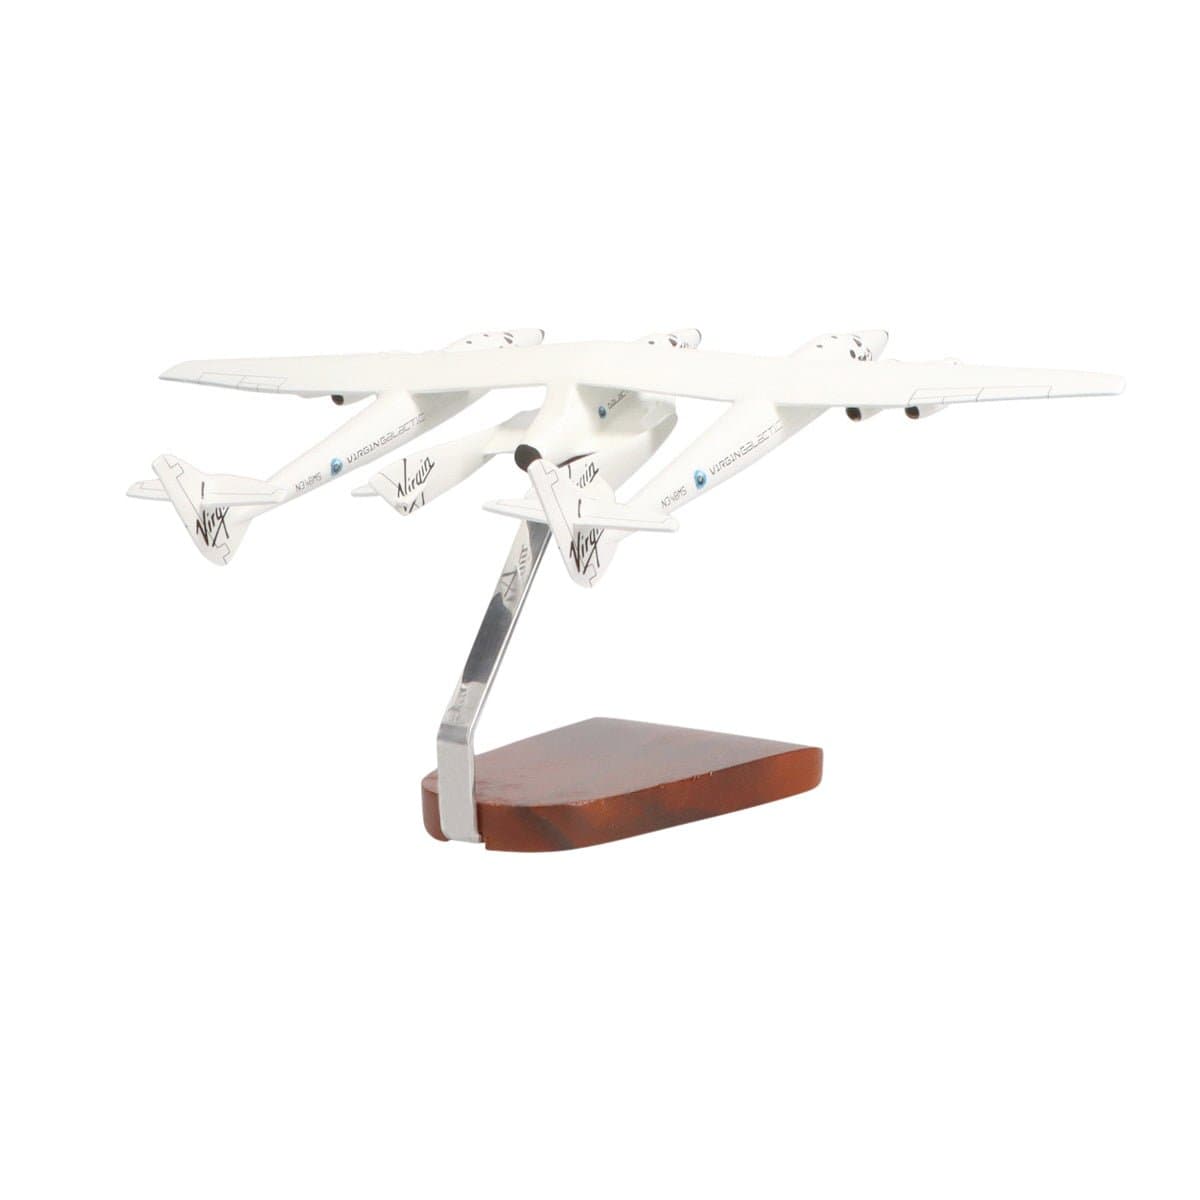 Virgin Galactic White Knight Two carrying SpaceShipTwo Large Mahogany Model